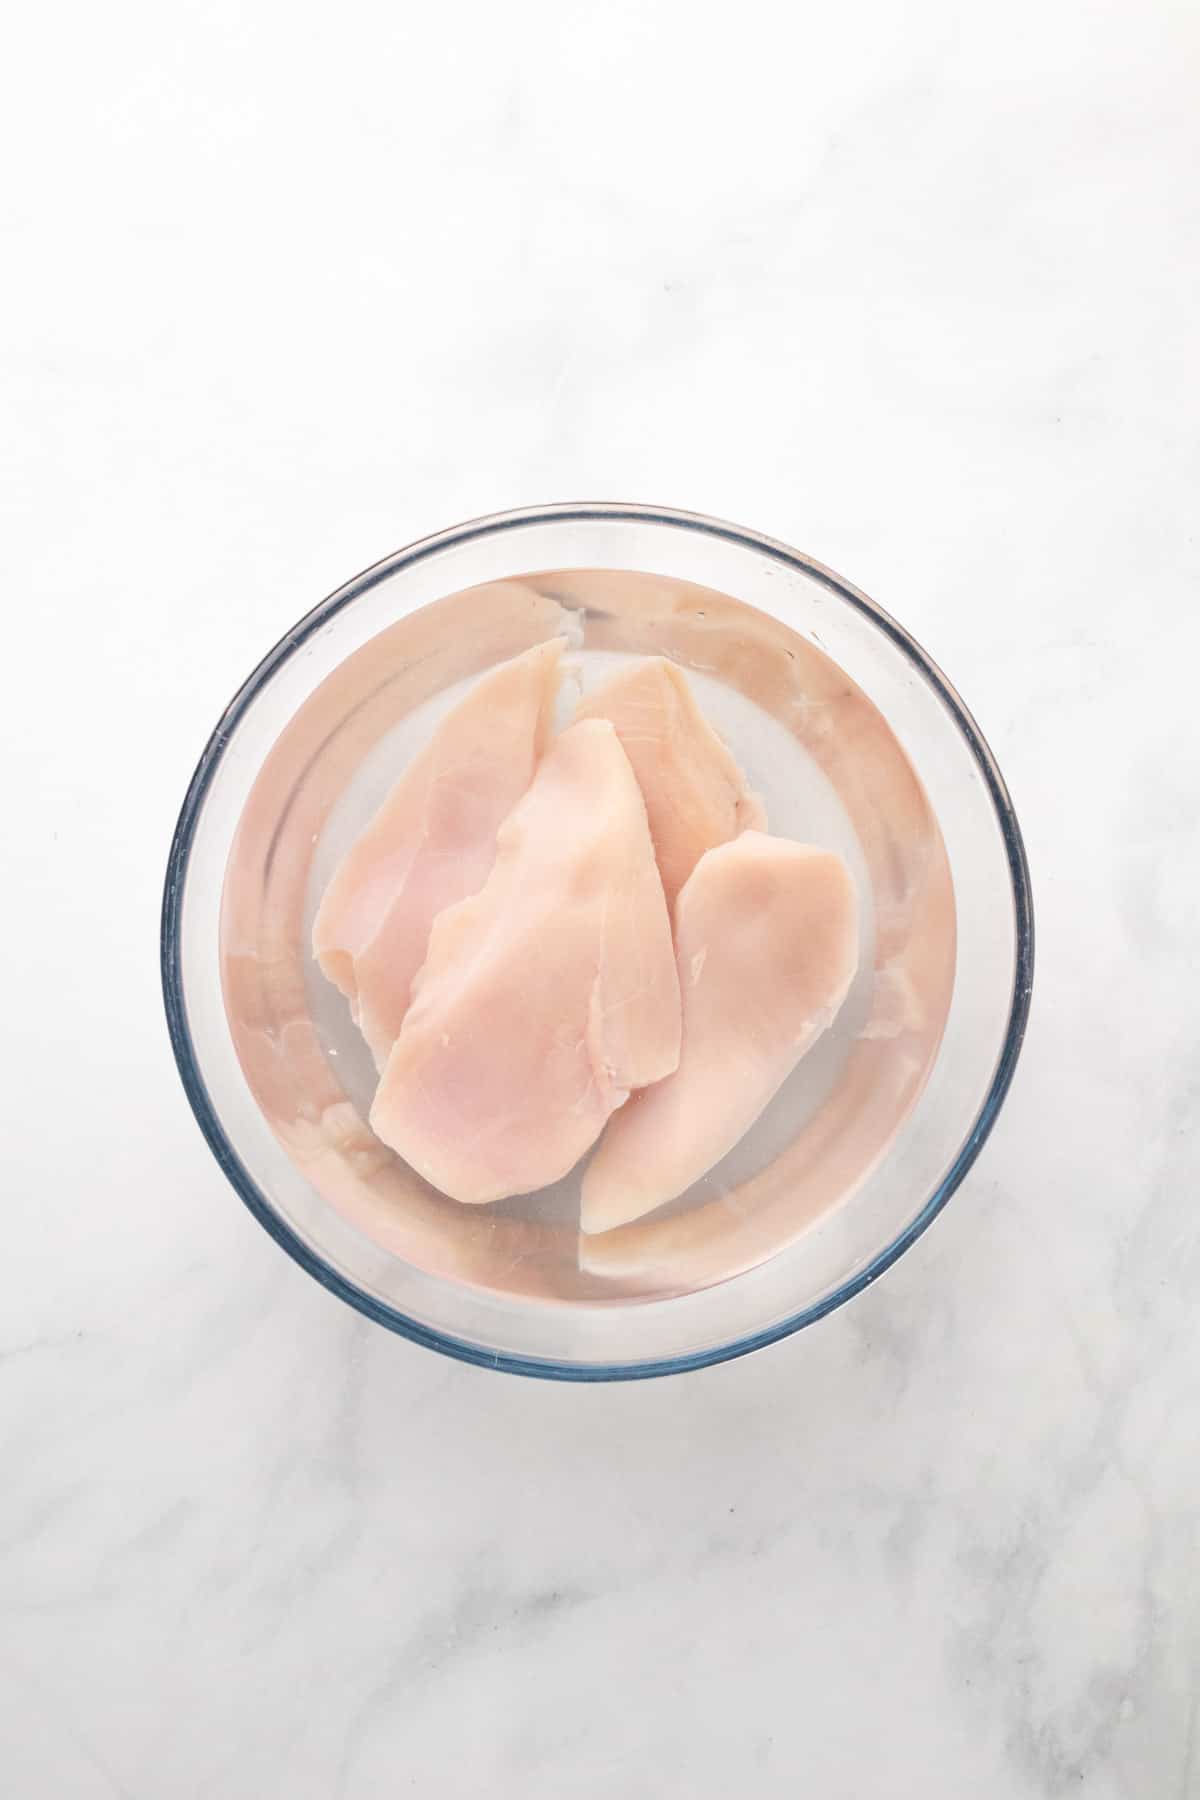 chicken breasts soaking in large bowl